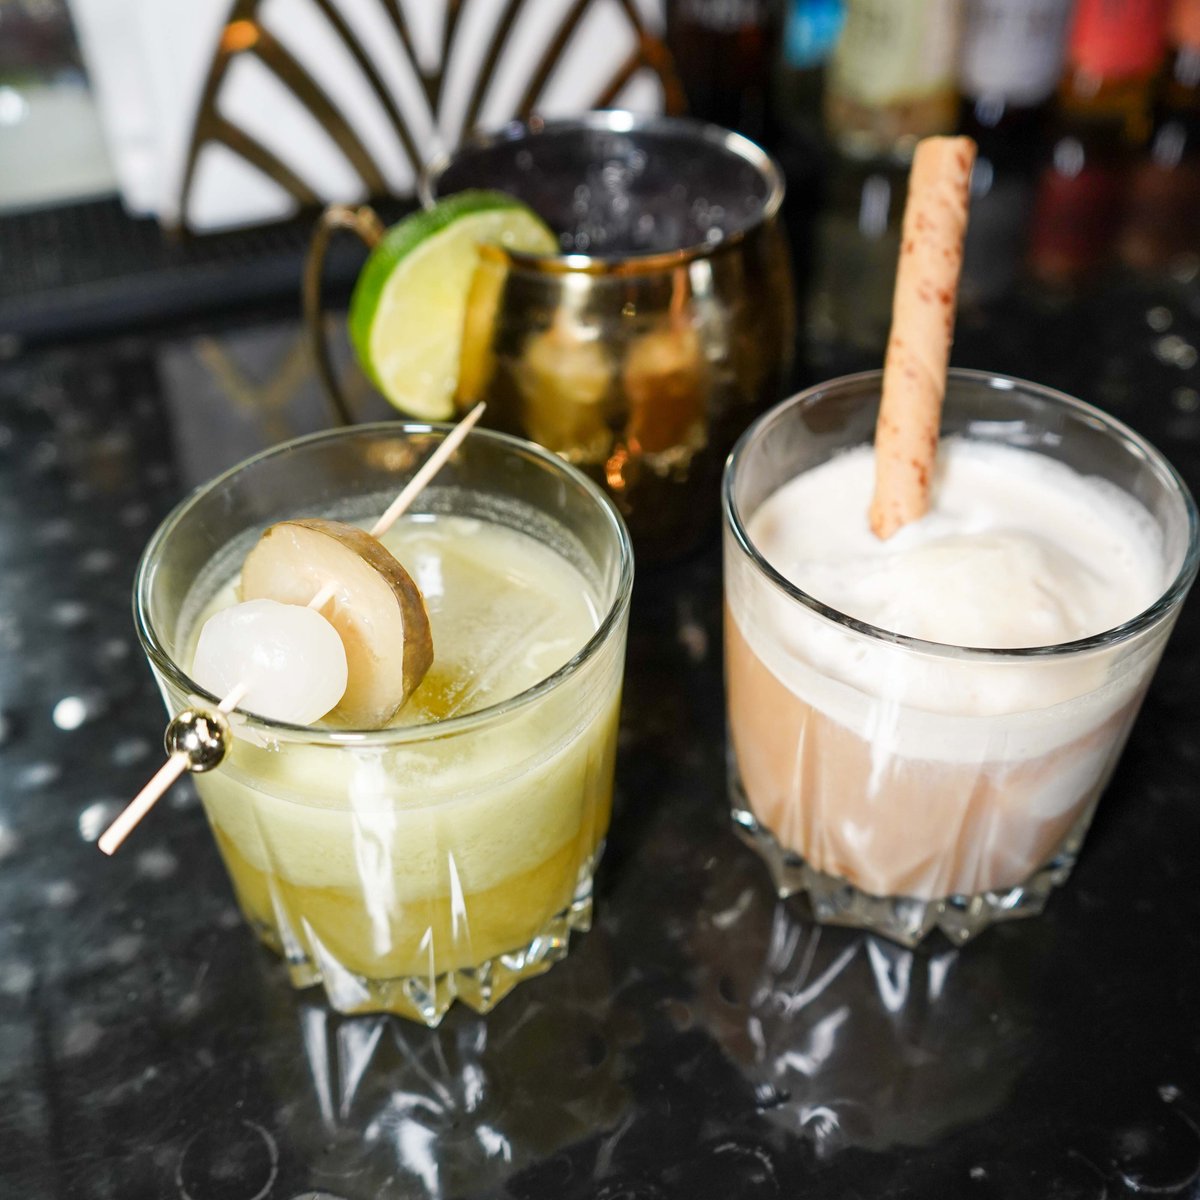 Cocktail Triple Treat! 🍸 Which one are you trying first? 🥂

1) The Shrek Gimlet
2) The Huck Finn Mule
3) The Affogato Martini

#ThirstyThursday #CocktailDelights #MixologyMondays #SipInStyle #CheersToLife #CraftedCocktails #CocktailArtistry